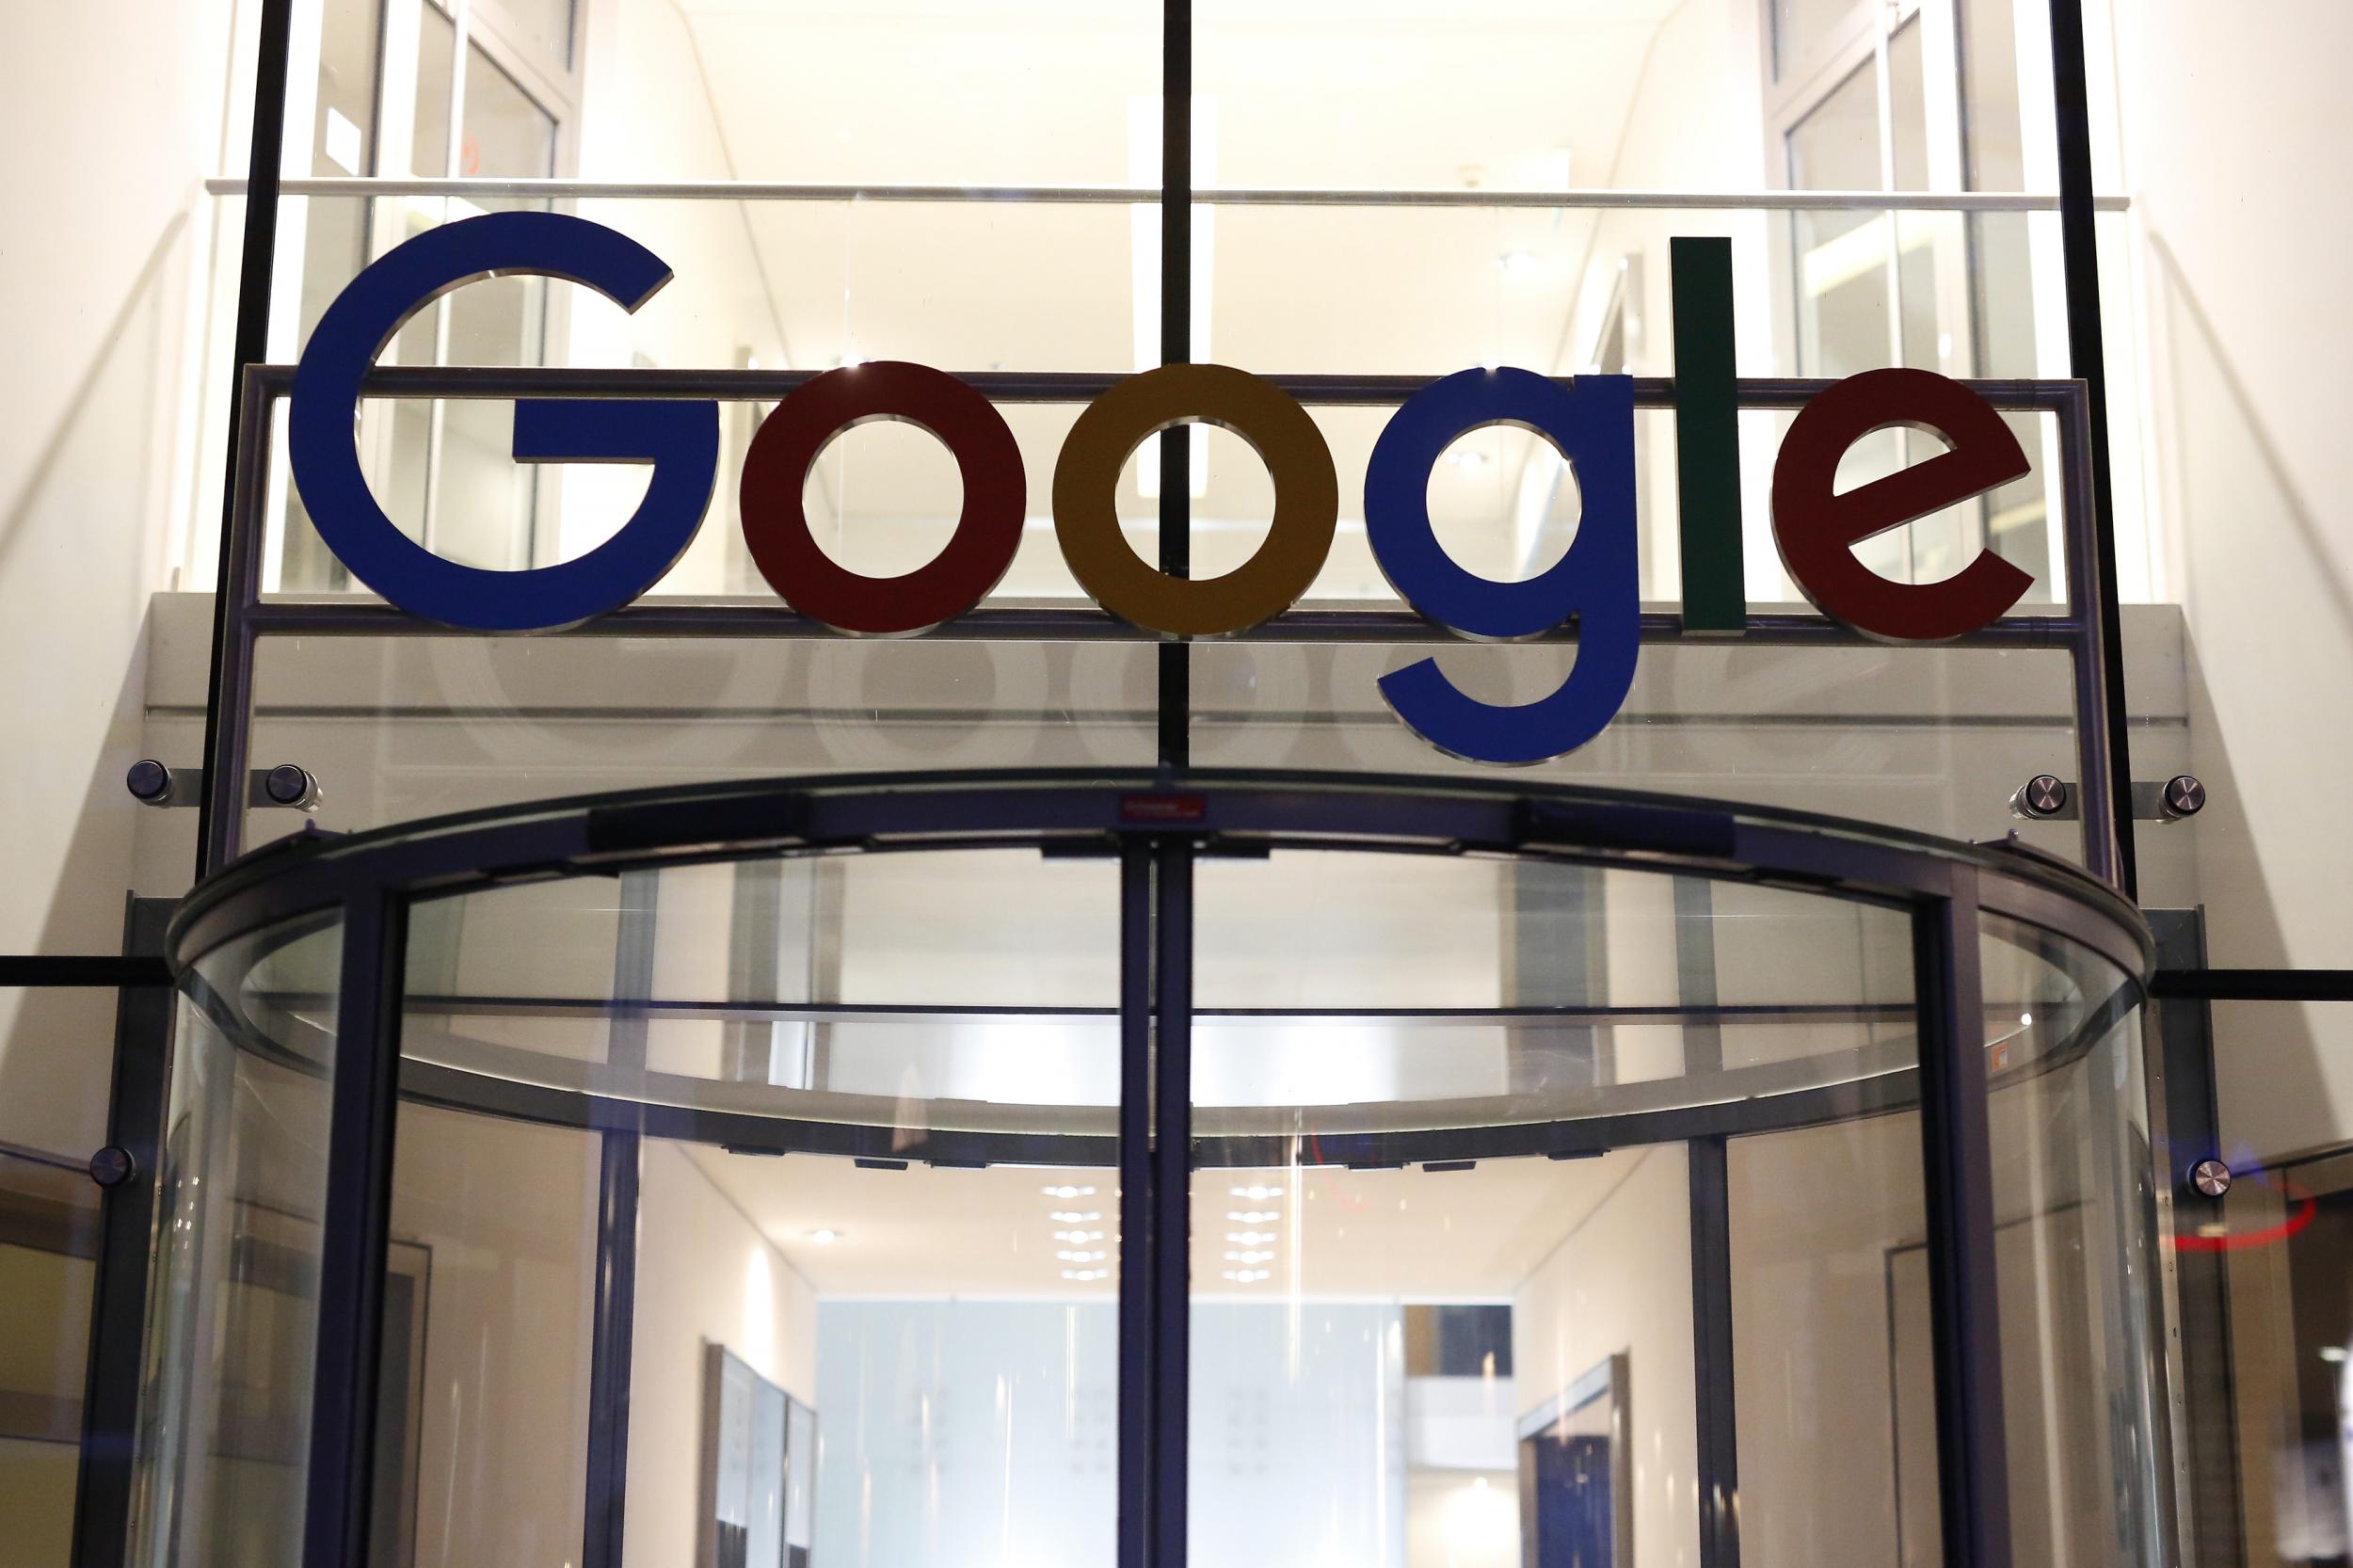 Details of Google’s court appeal were revealed on Monday